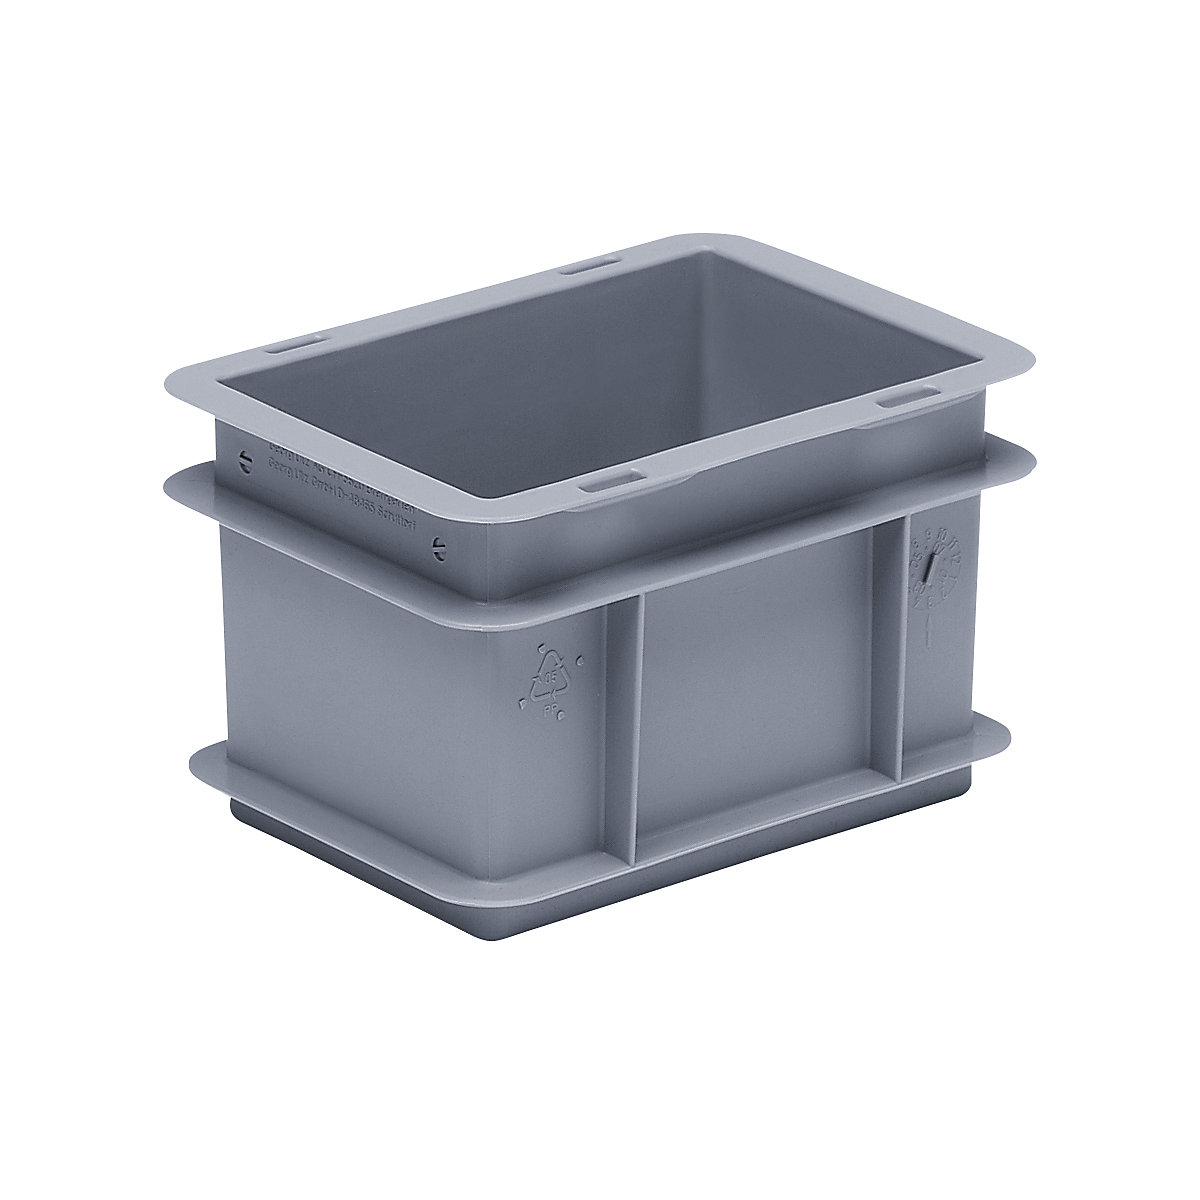 Euro stacking container made of polypropylene (PP), max. load 20 kg, silver grey, capacity 2 l, external height 120 mm, pack of 12